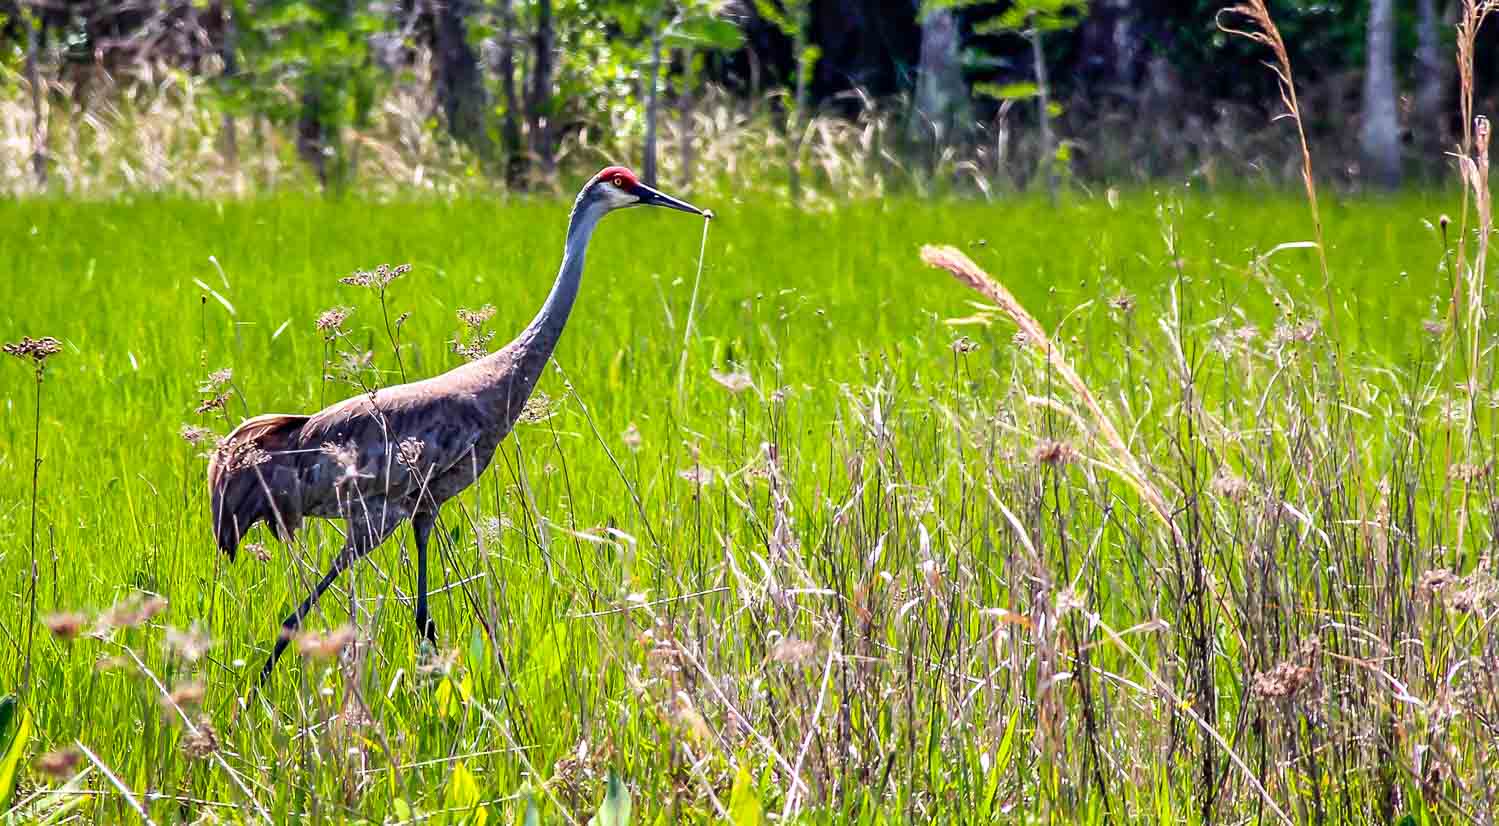 A sandhill crane - known for its' loud squawky voice